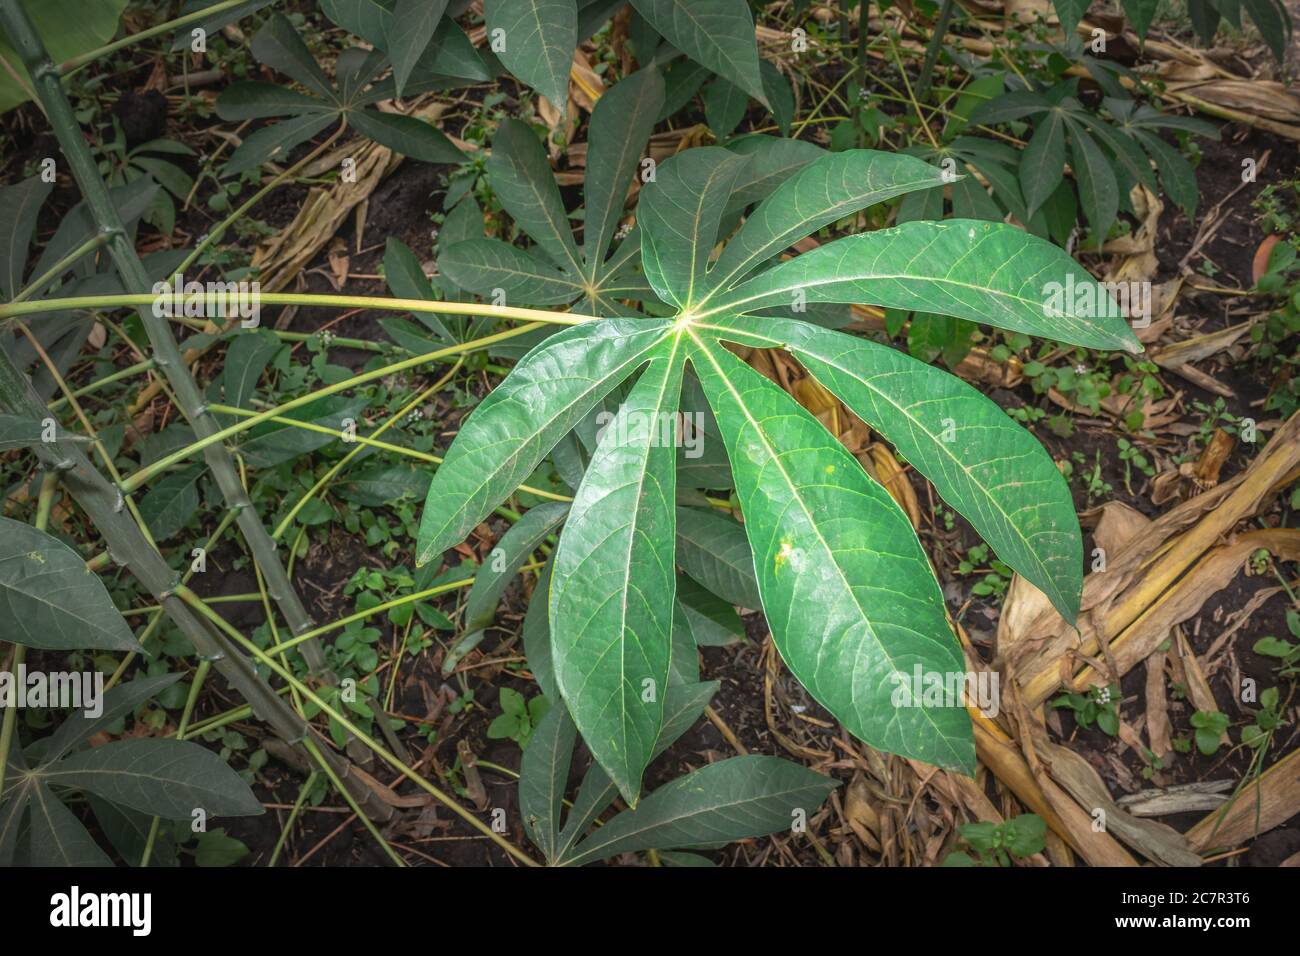 Cassava Plant High Resolution Stock Photography And Images Alamy,Lemon Butter Caper Sauce